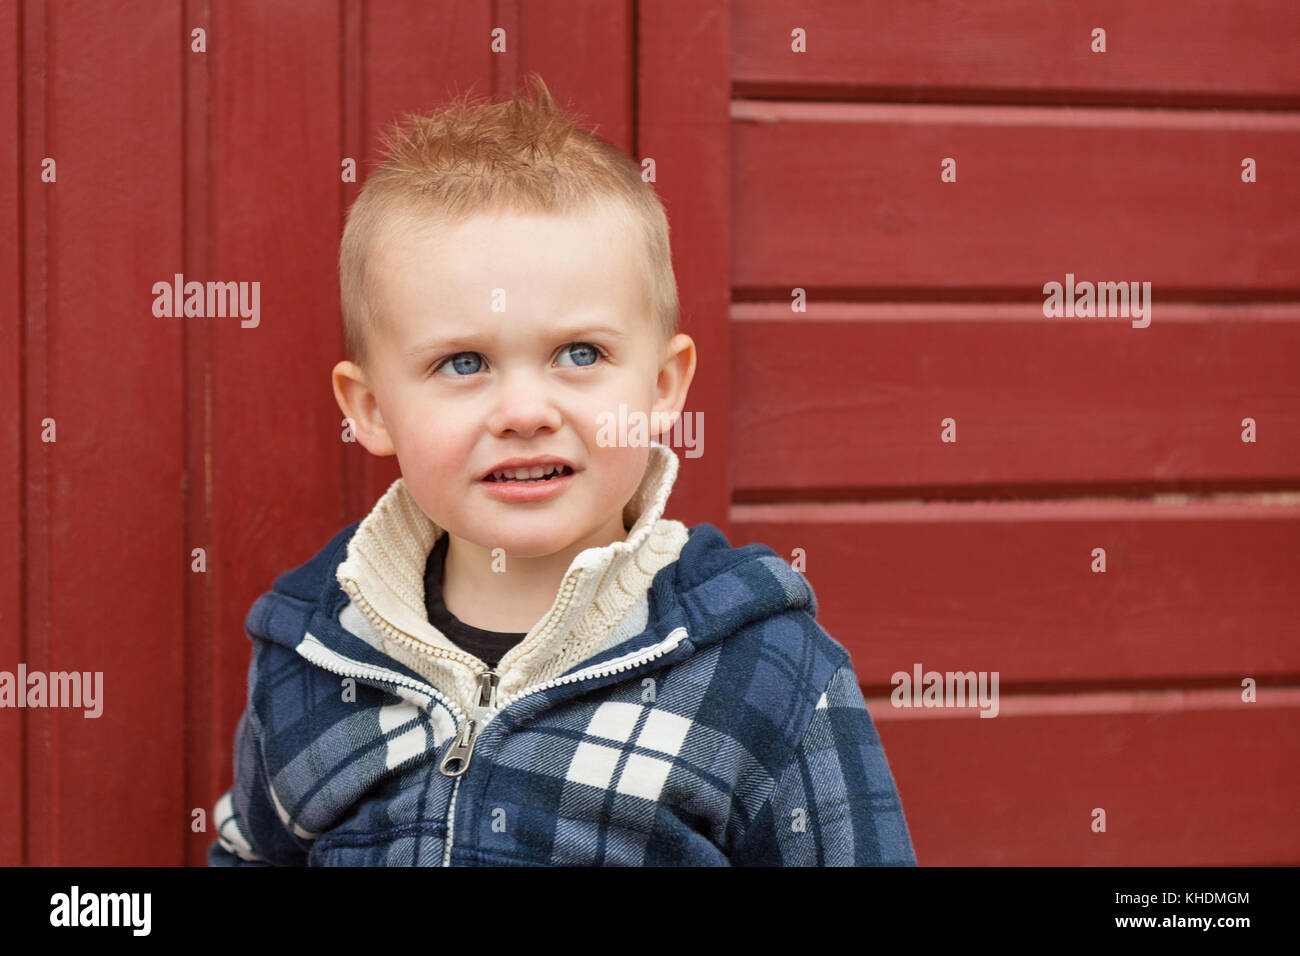 Outdoor portrait of young 2 year old caucasian boy in front of red wooden  background Model Release: Yes. Property Release: No Stock Photo - Alamy